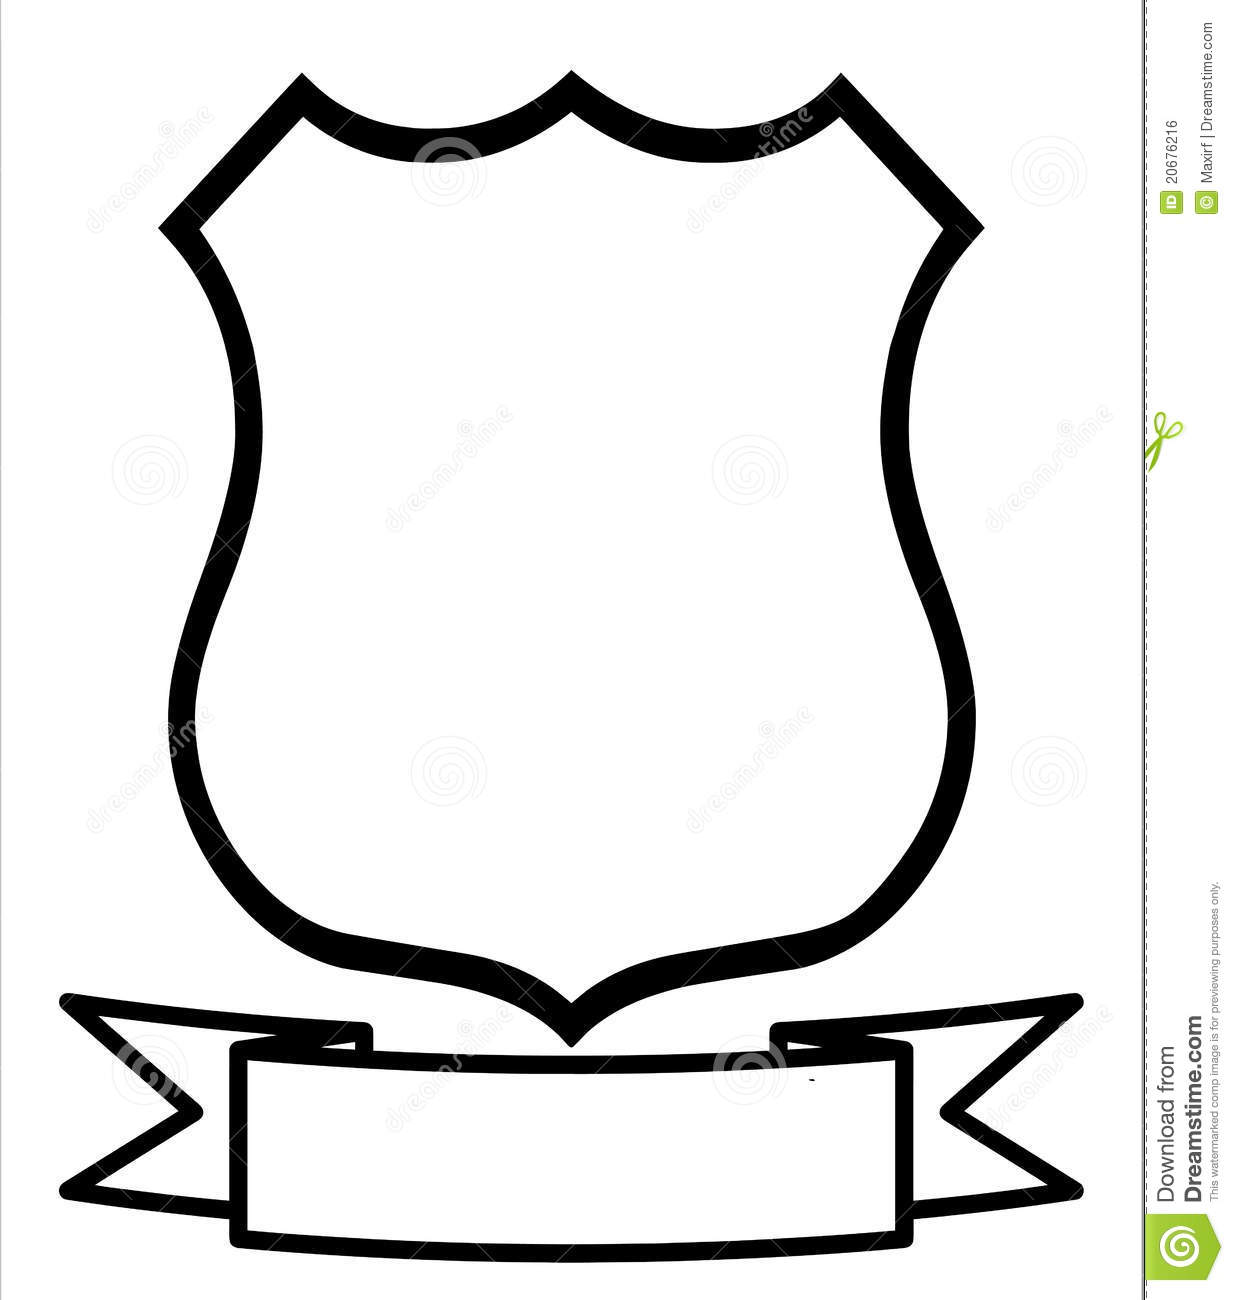 Cool Shield Template   Clipart Panda   Free Clipart Images